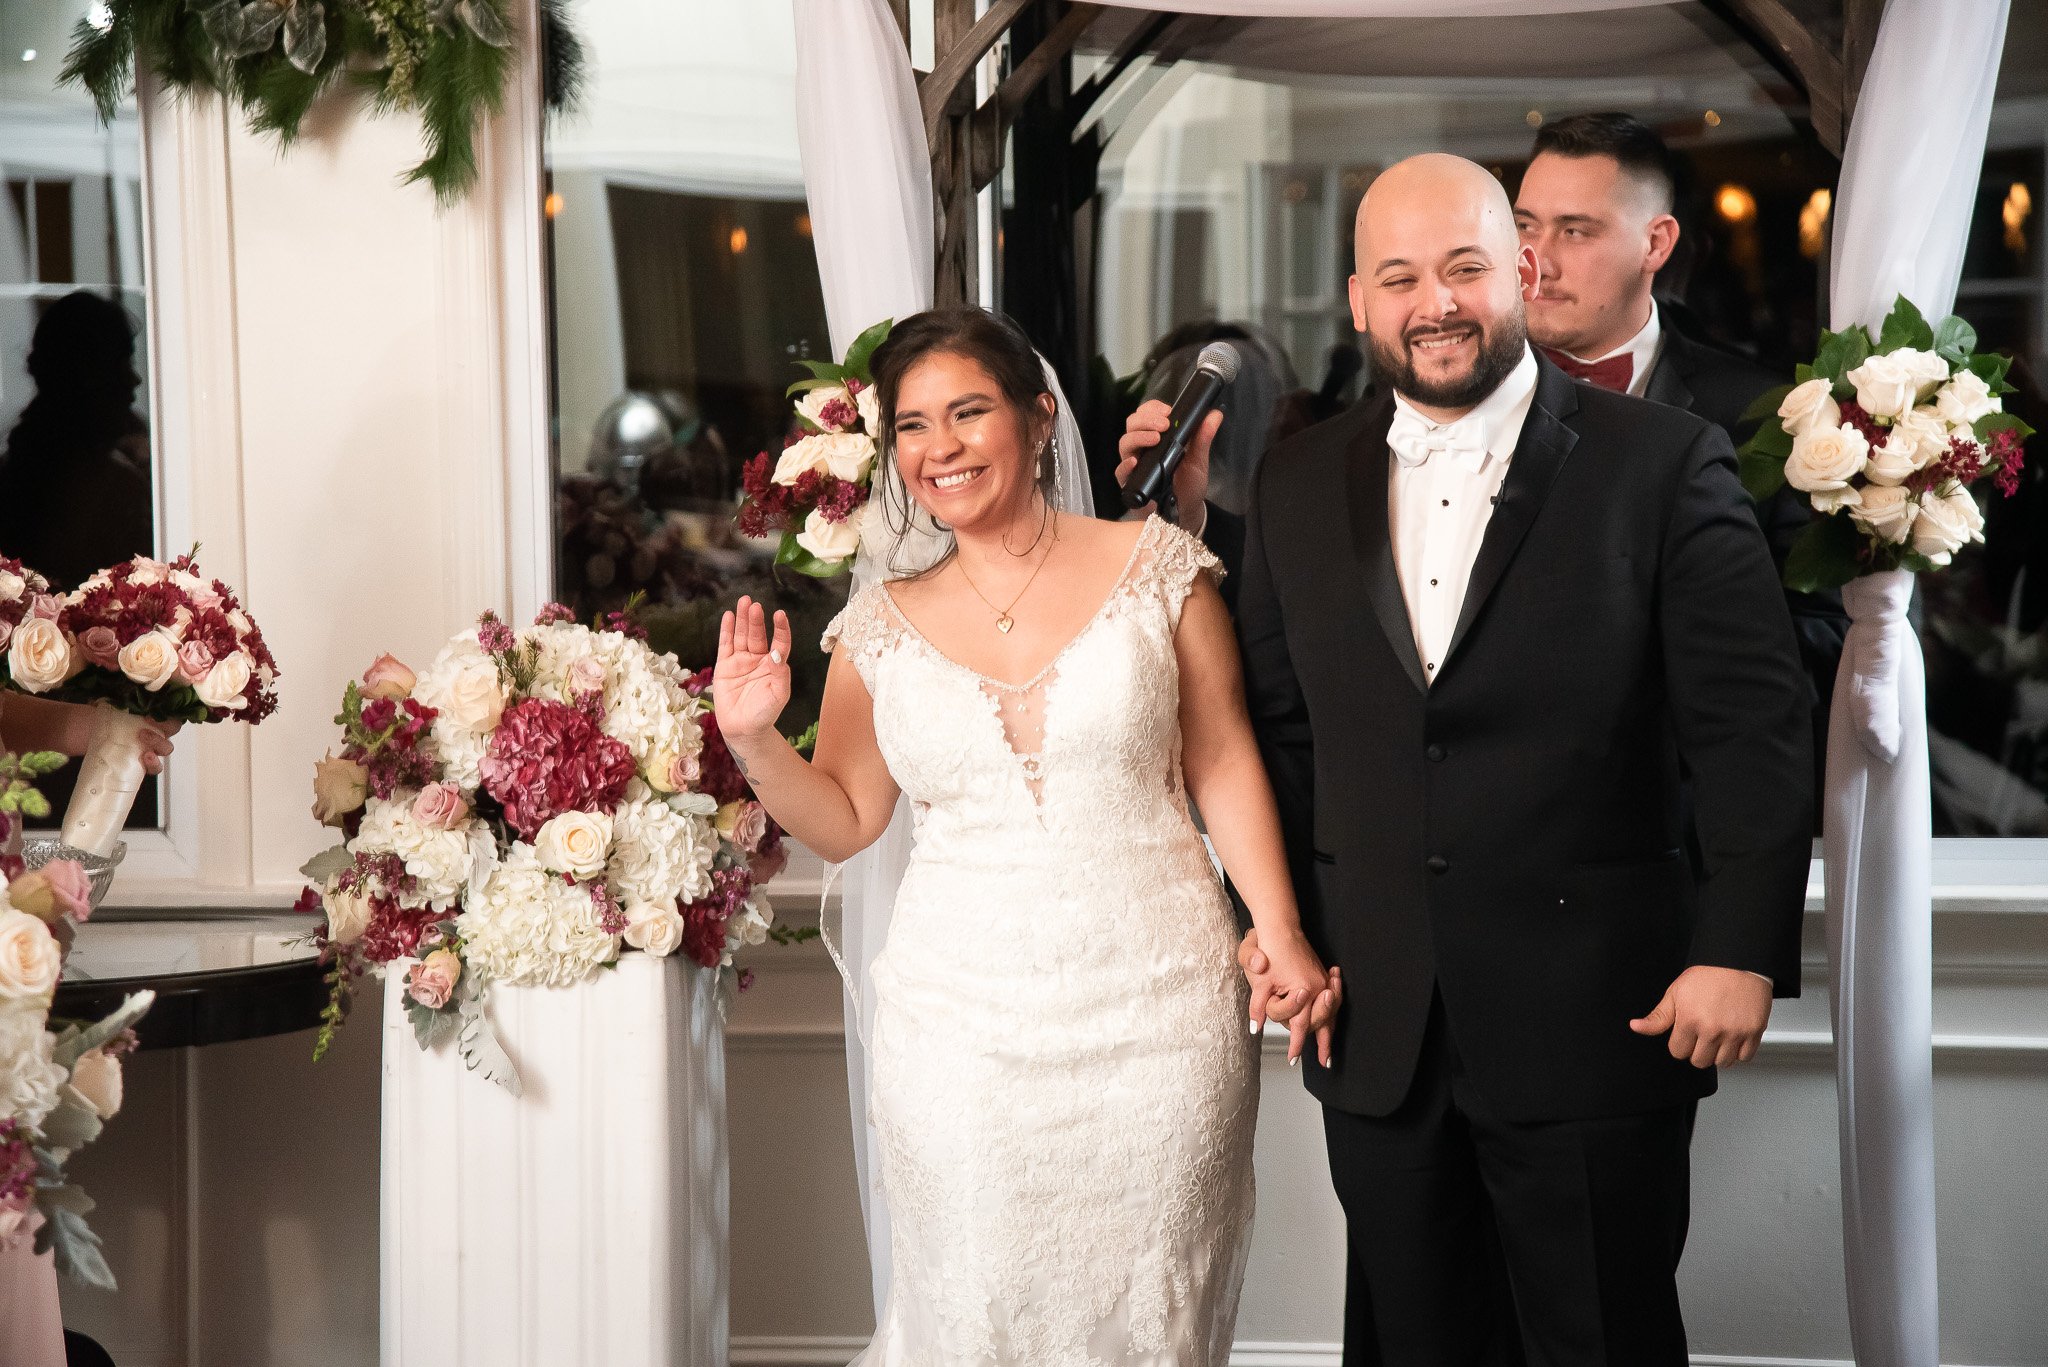 Indoor Ceremony Pictures - The Mansion at West Sayville